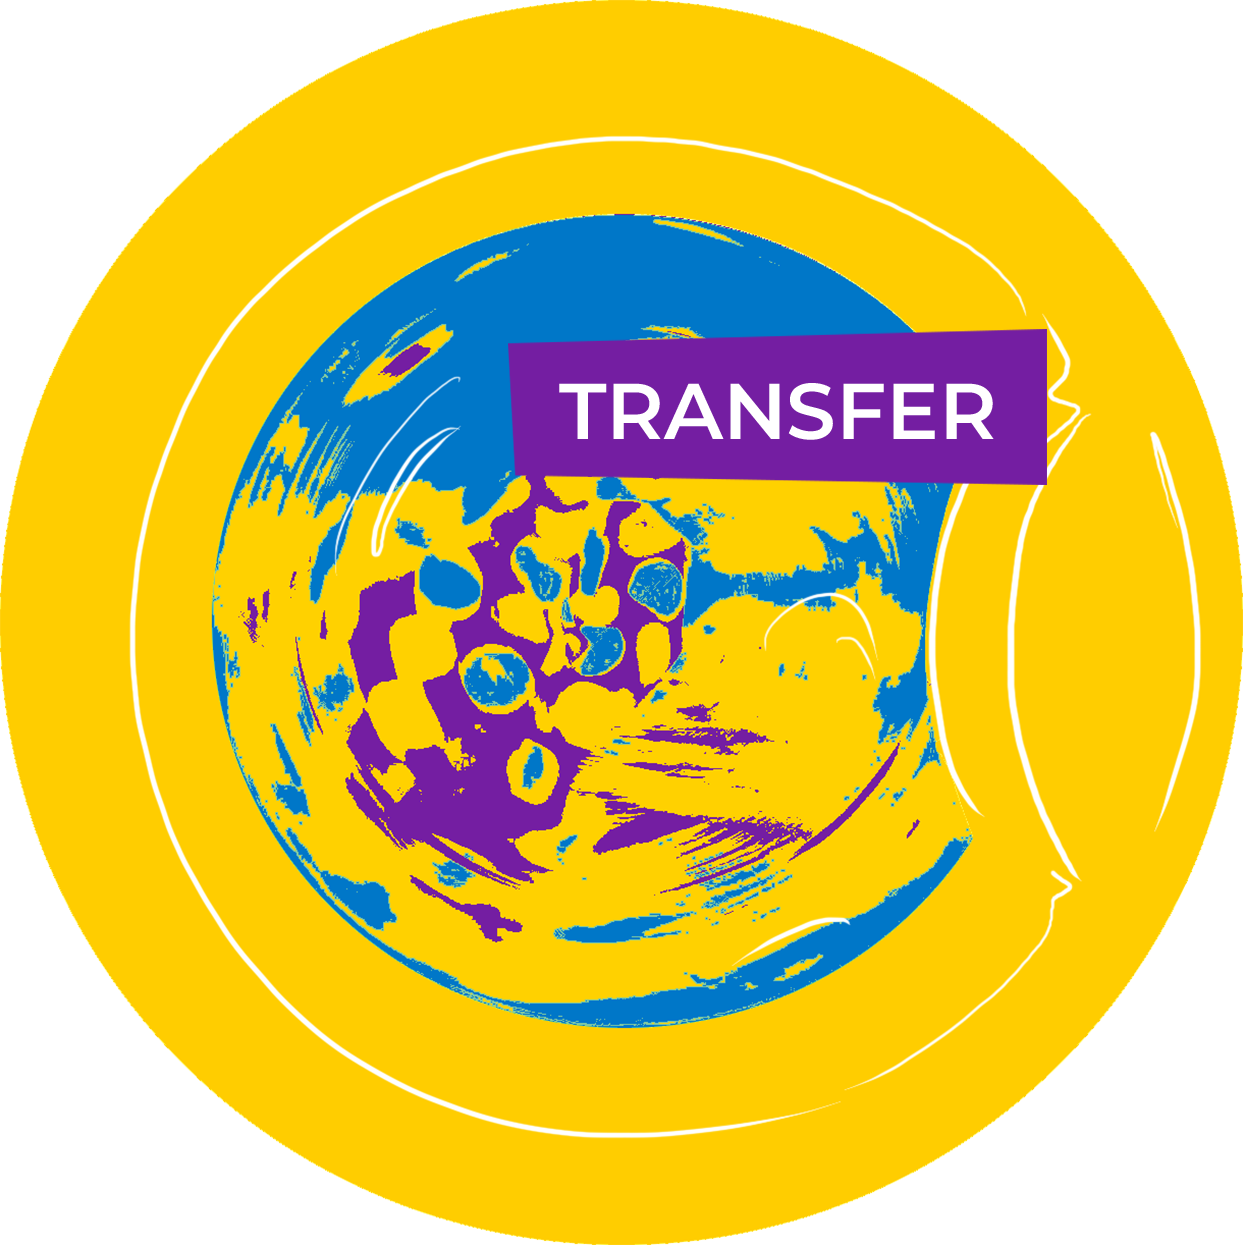 a washer as a symbol for transferring learning, with the label TRANSFER